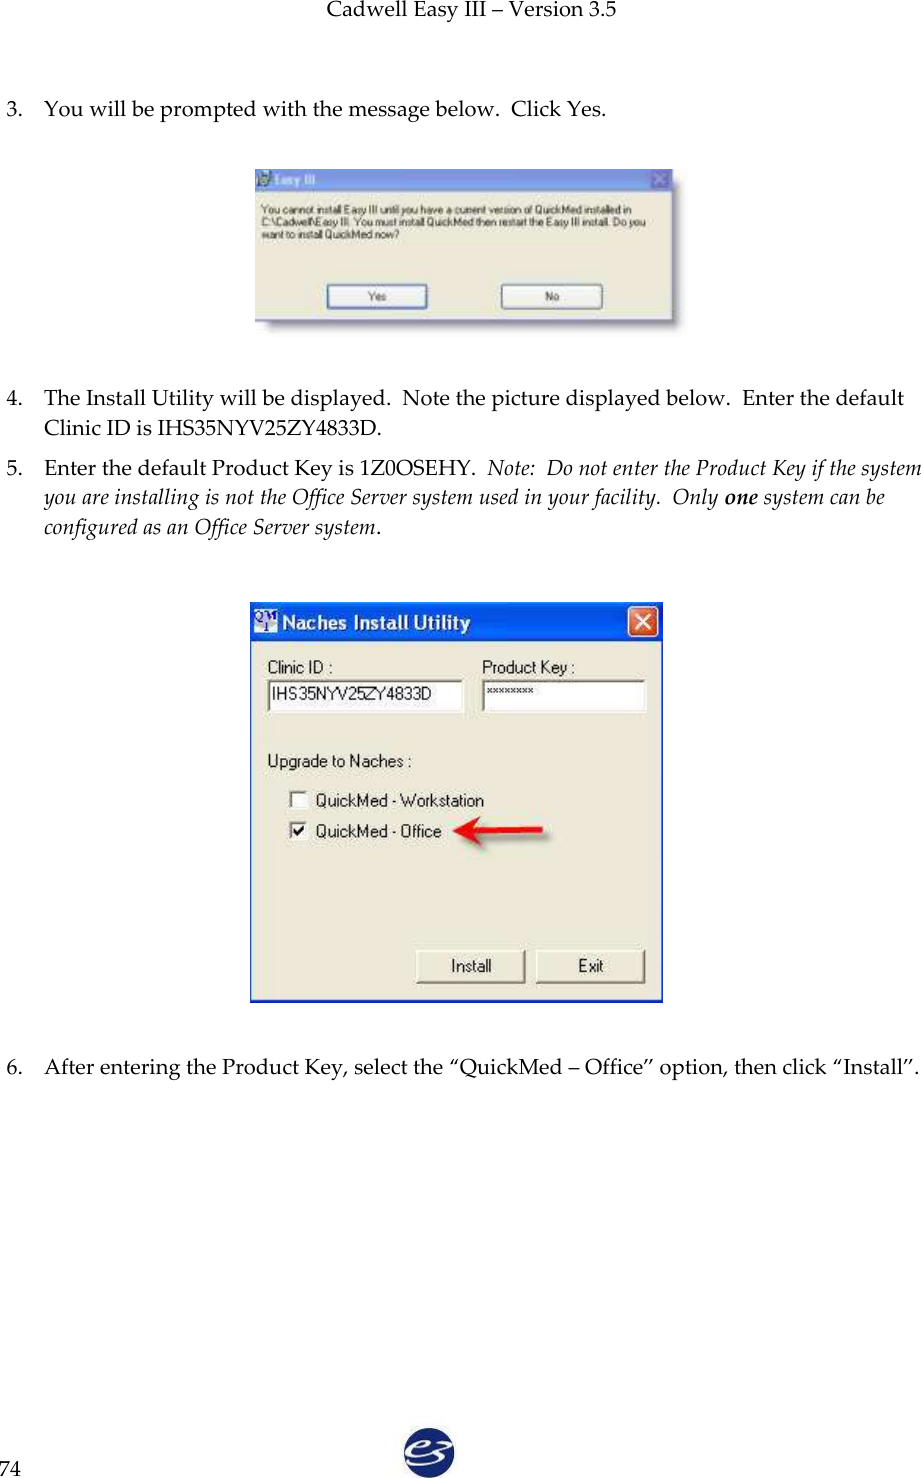 Cadwell Easy III – Version 3.5   74  3. You will be prompted with the message below.  Click Yes.    4. The Install Utility will be displayed.  Note the picture displayed below.  Enter the default Clinic ID is IHS35NYV25ZY4833D.   5. Enter the default Product Key is 1Z0OSEHY.  Note:  Do not enter the Product Key if the system you are installing is not the Office Server system used in your facility.  Only one system can be configured as an Office Server system.                 6. After entering the Product Key, select the ‚QuickMed – Office‛ option, then click ‚Install‛.  